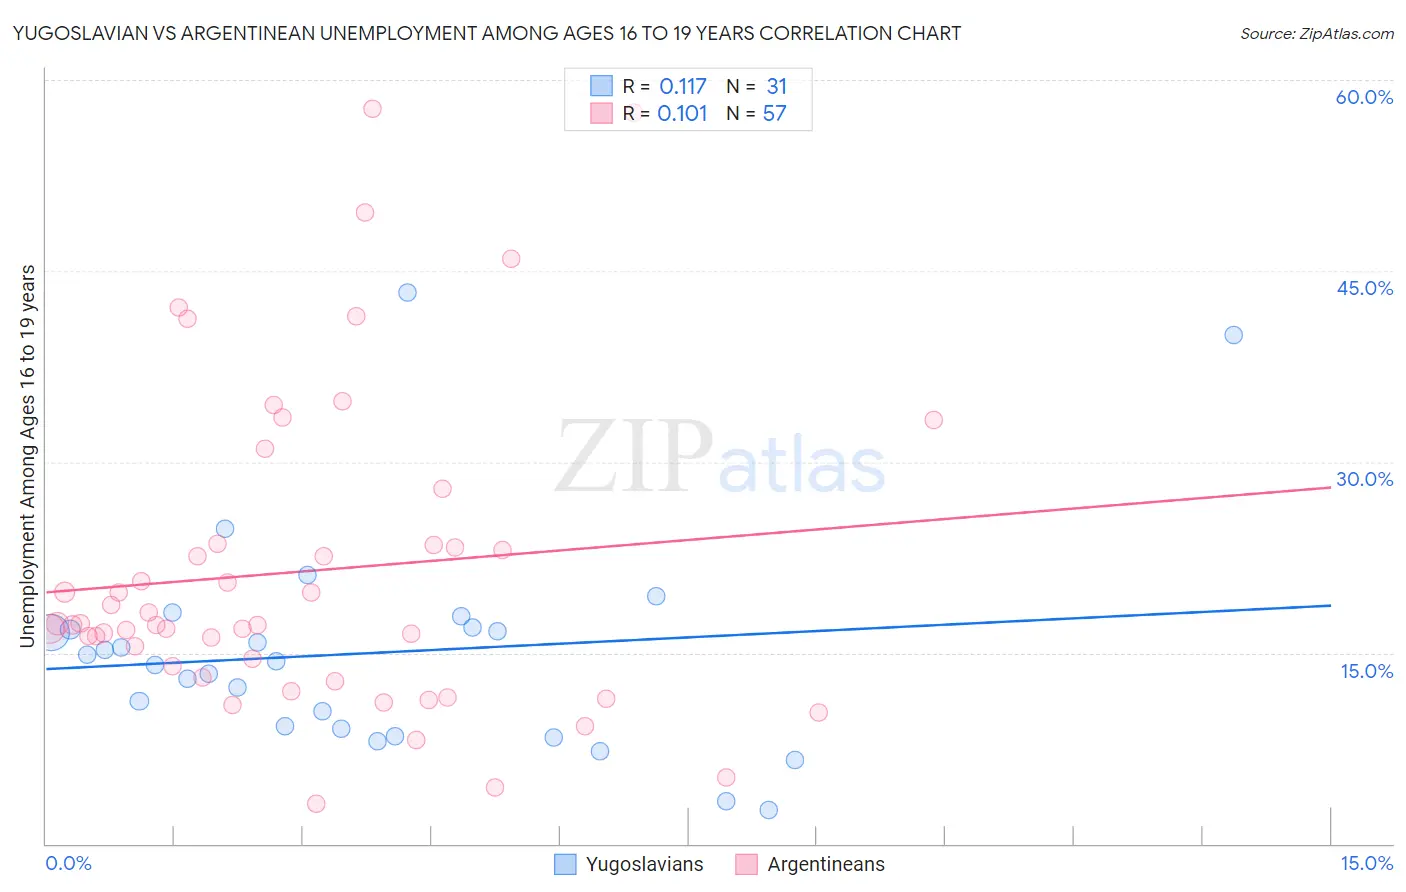 Yugoslavian vs Argentinean Unemployment Among Ages 16 to 19 years